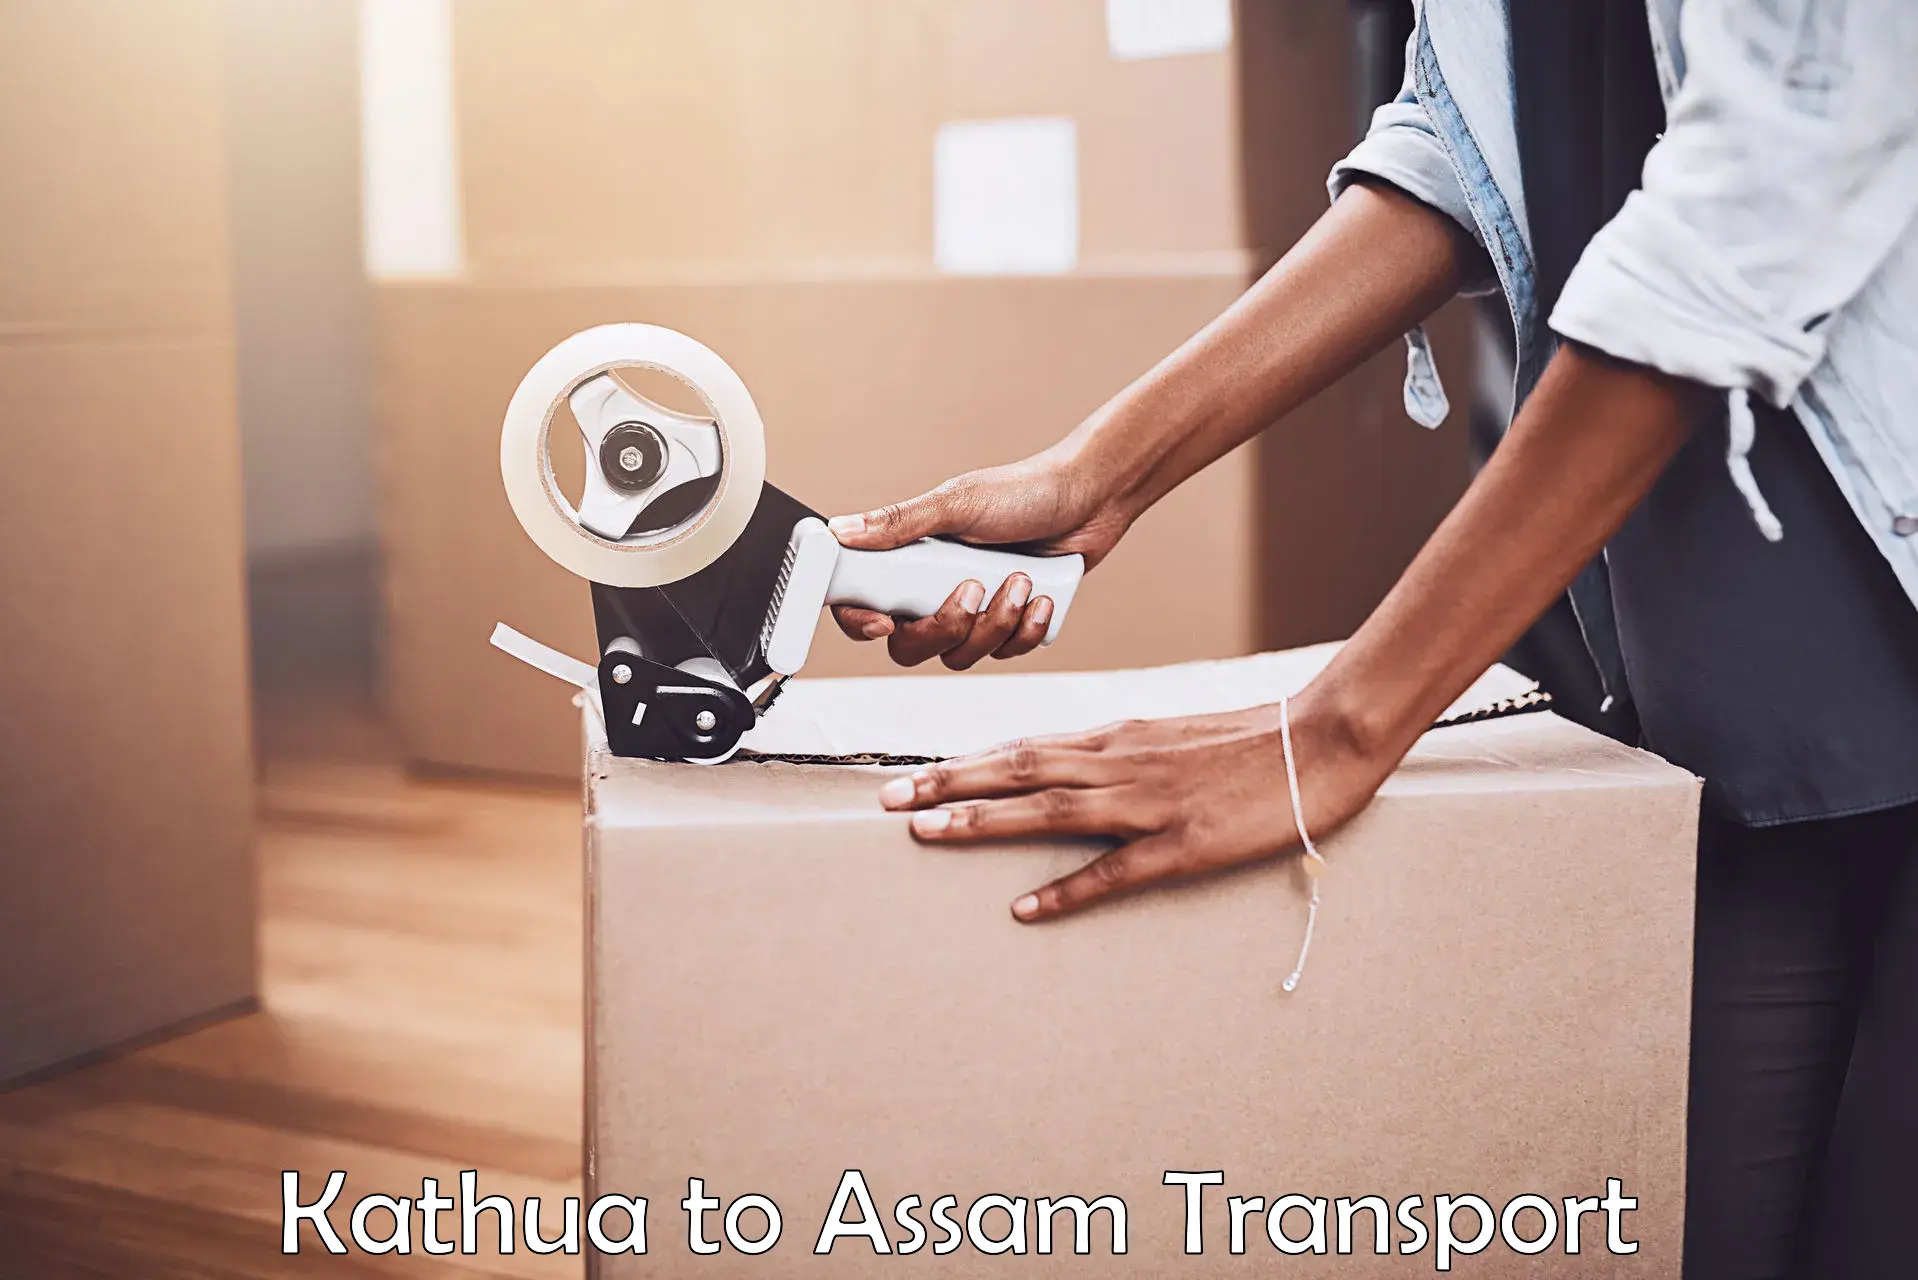 Truck transport companies in India Kathua to Assam